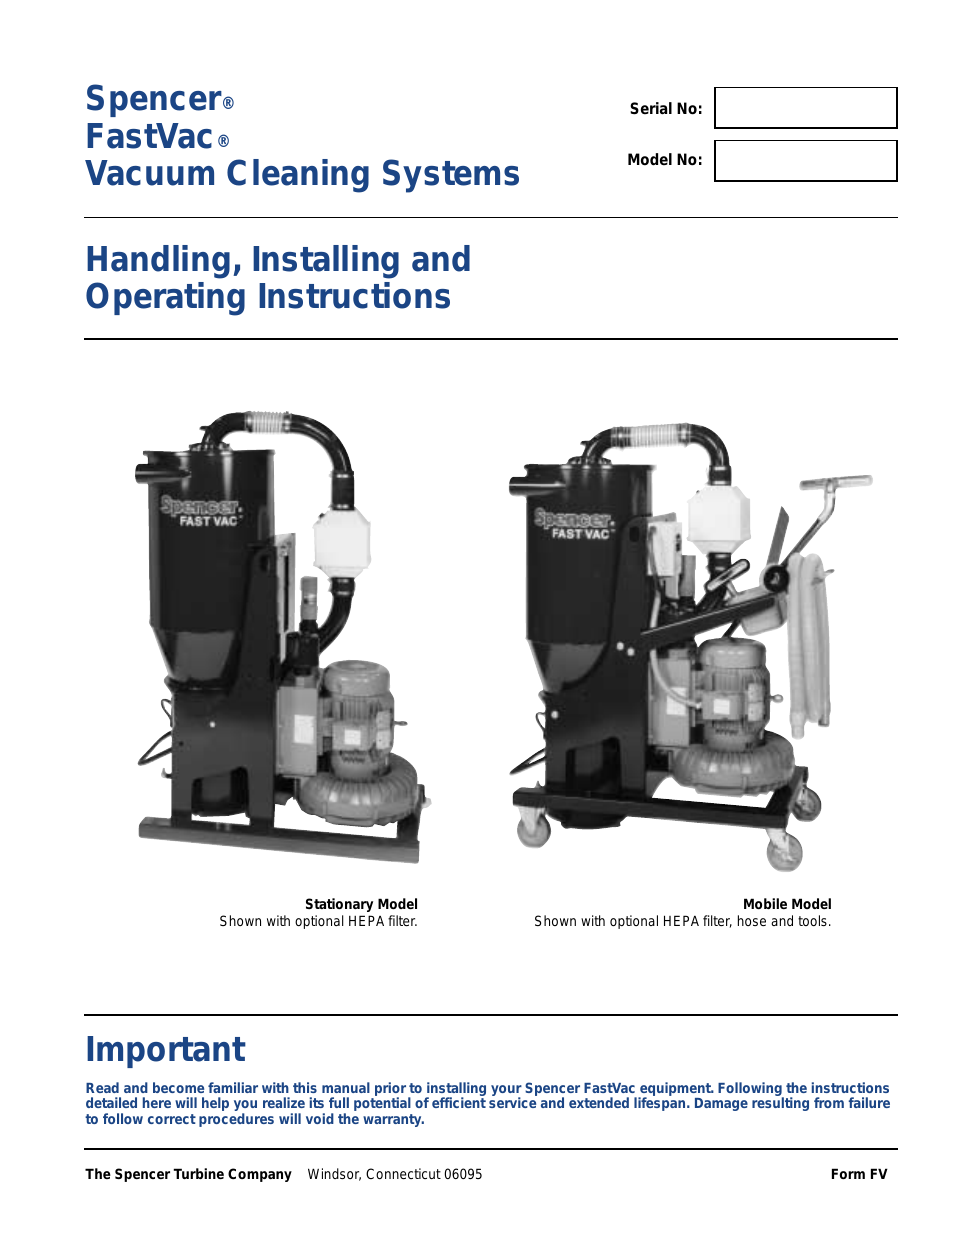 FastVac Vacuum Cleaning Systems